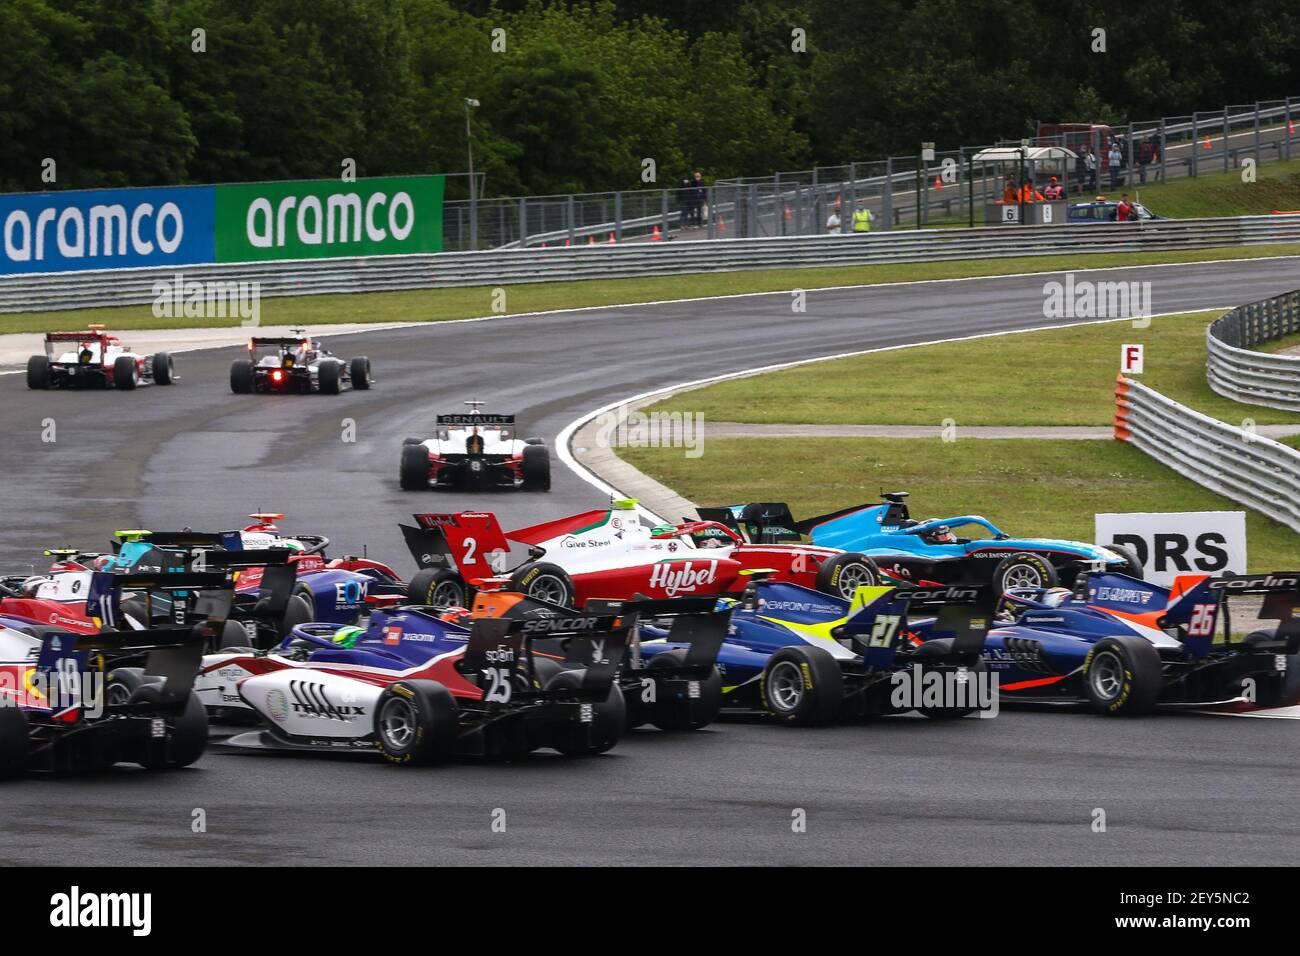 Crash at the start of the race, 02 Vesti Frederik (dnk), Prema Racing,  Dallara F3 2019, during the 3rd round of the 2020 FIA Formula 3  Championship from July 17 to 19,